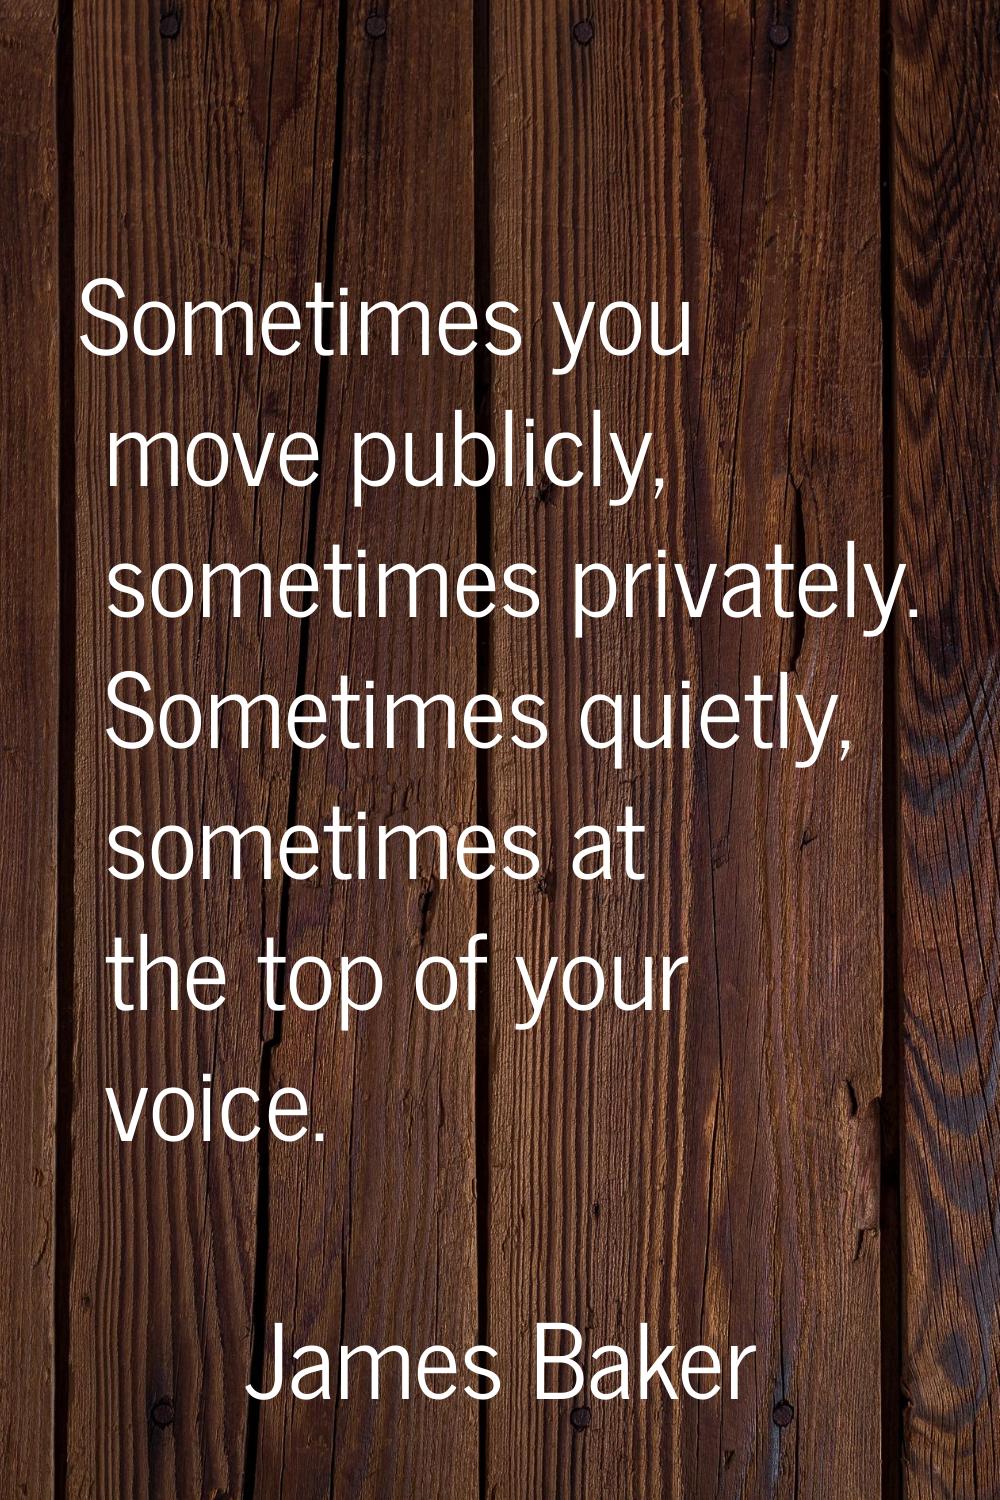 Sometimes you move publicly, sometimes privately. Sometimes quietly, sometimes at the top of your v